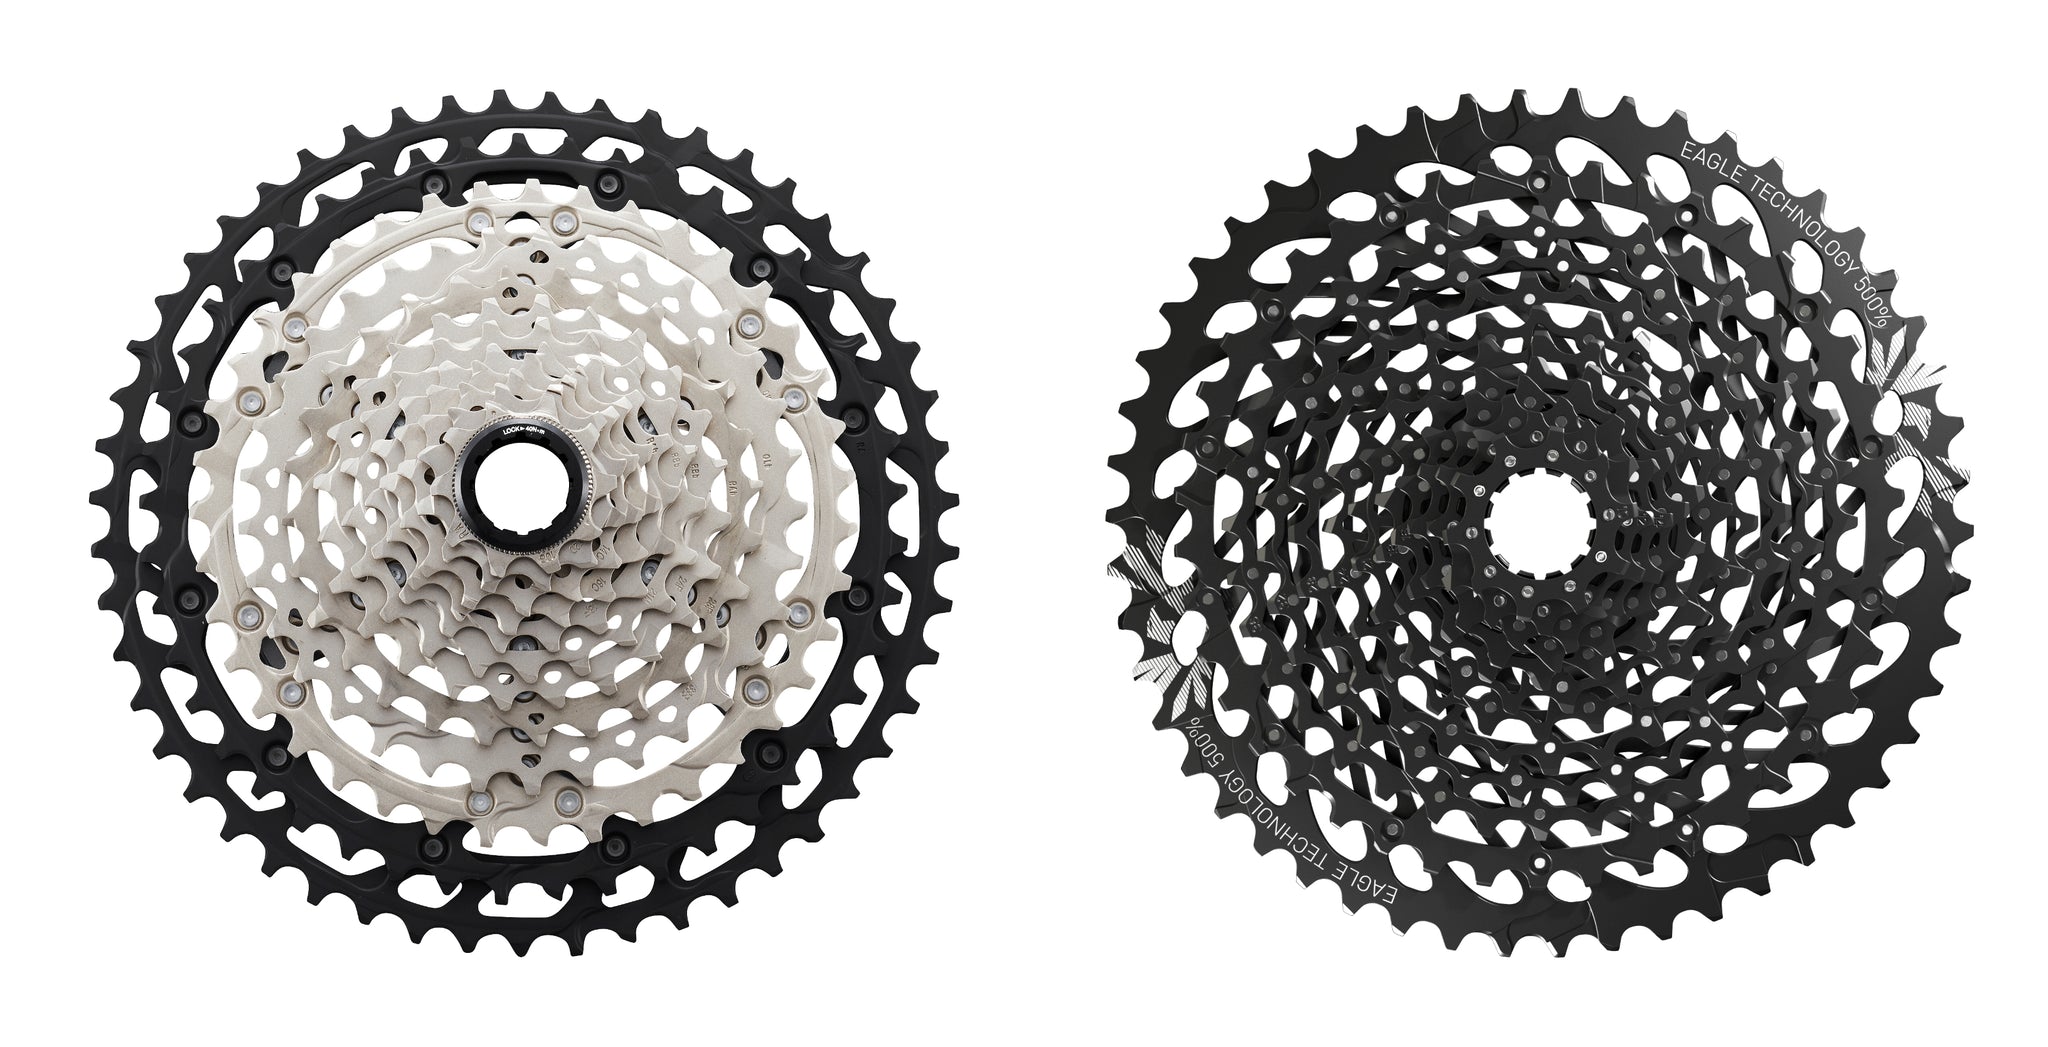 Shimano deore Xt and SRAM GX eagle cassettes